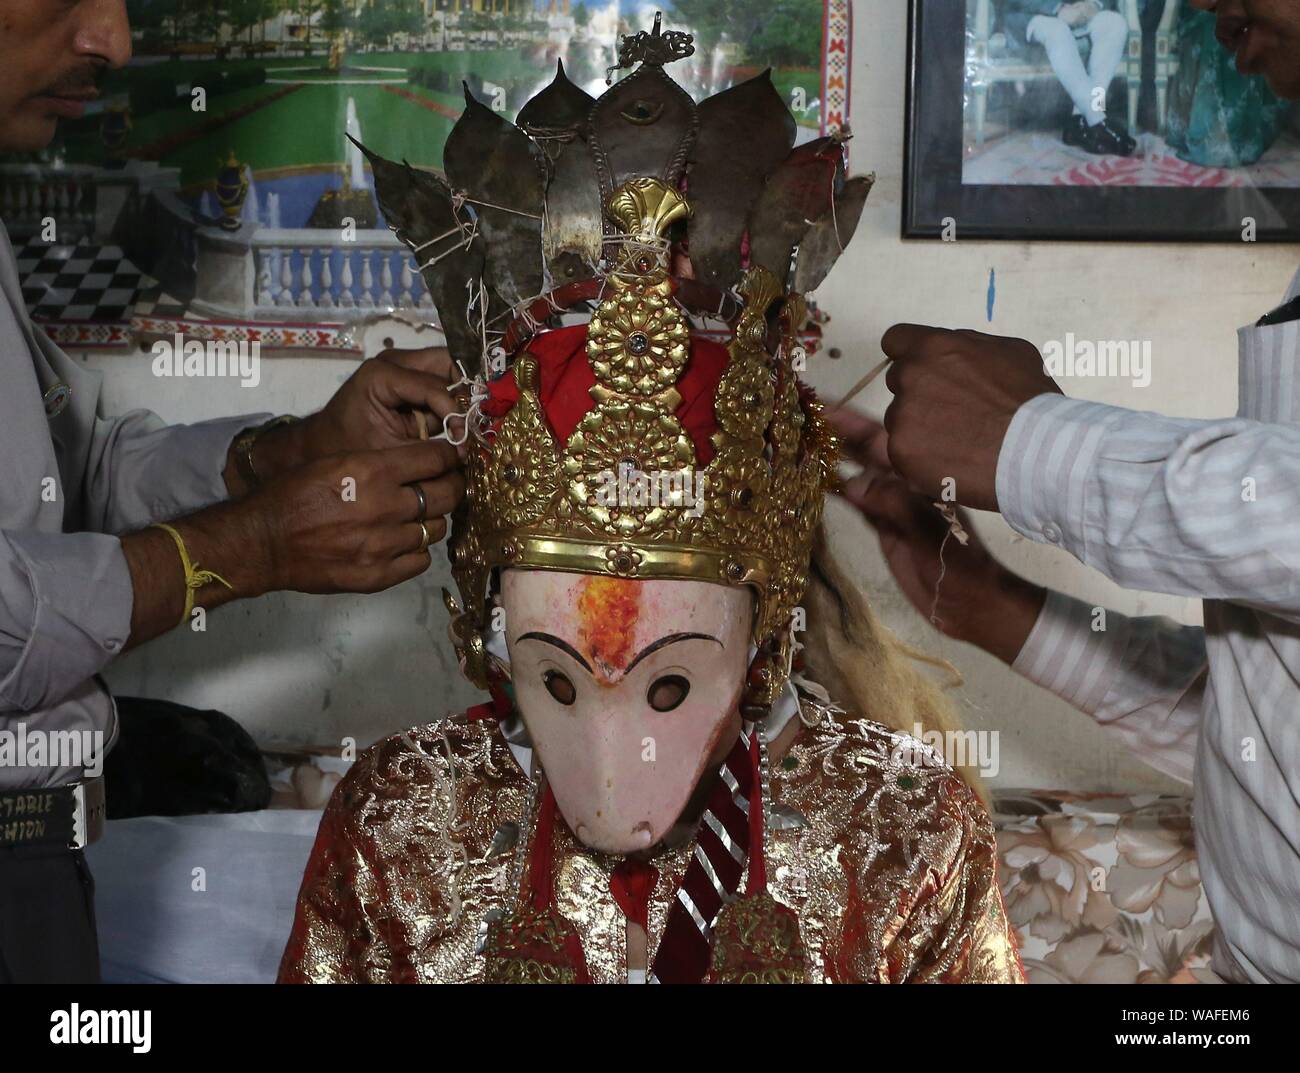 Lalitpur, Nepal. 20th Aug, 2019. A man is tied up the crown of deity Narsingh as he gets ready to participate in Narsingh Festival in Lalitpur, Nepal, Aug. 20, 2019. Narsingh Festival is one of the unique festivals celebrated in Lalitpur started by the Malla King of Patan, Siddhi Narsingh Malla, in 1631. The festival is celebrated annually in belief that it will bring peace to the soul of those who passed away, good health and prosperity. Credit: Sunil Sharma/Xinhua Stock Photo